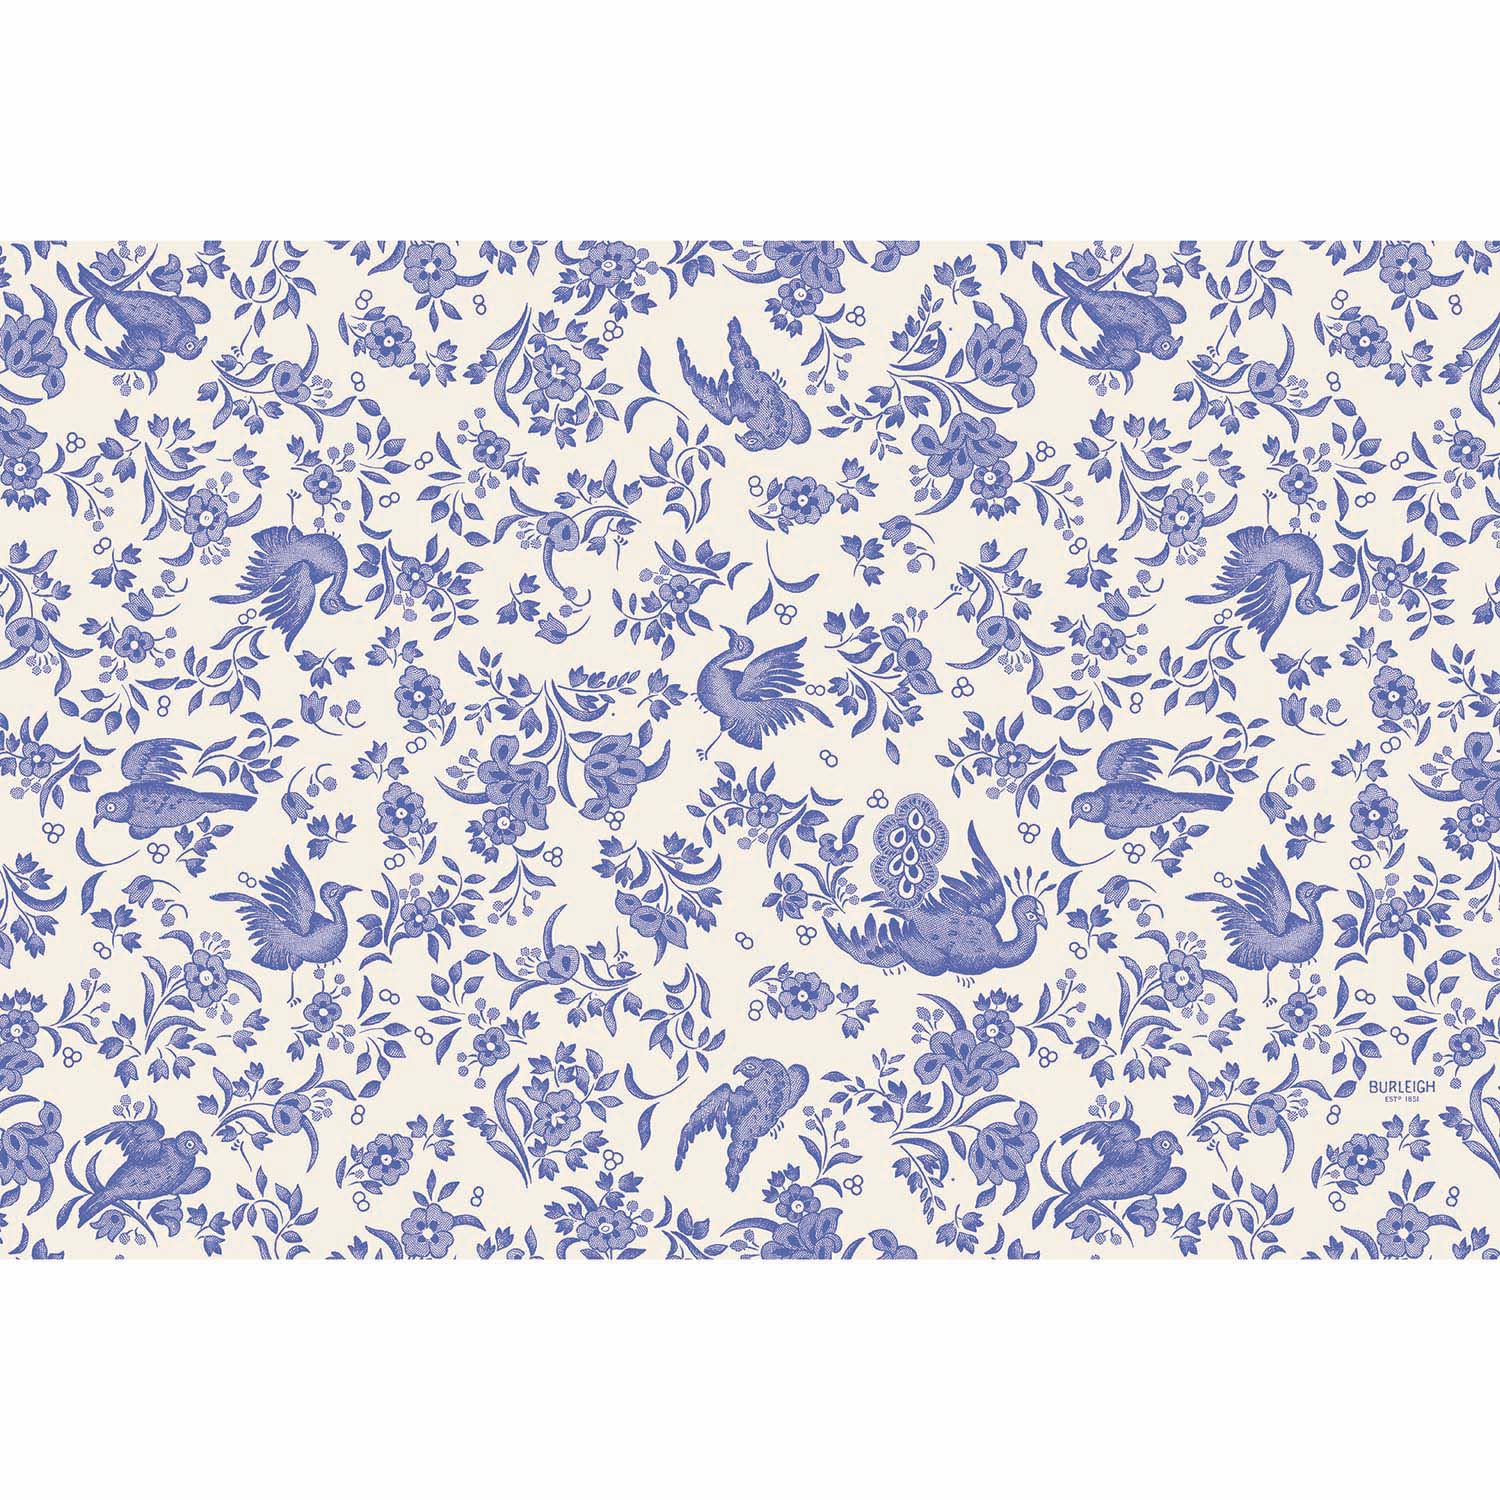 A Blue Regal Peacock Paper Placemat from Hester &amp; Cook, featuring a blue bird and floral pattern on a white background, inspired by the ornamental bird pattern from Burleigh.